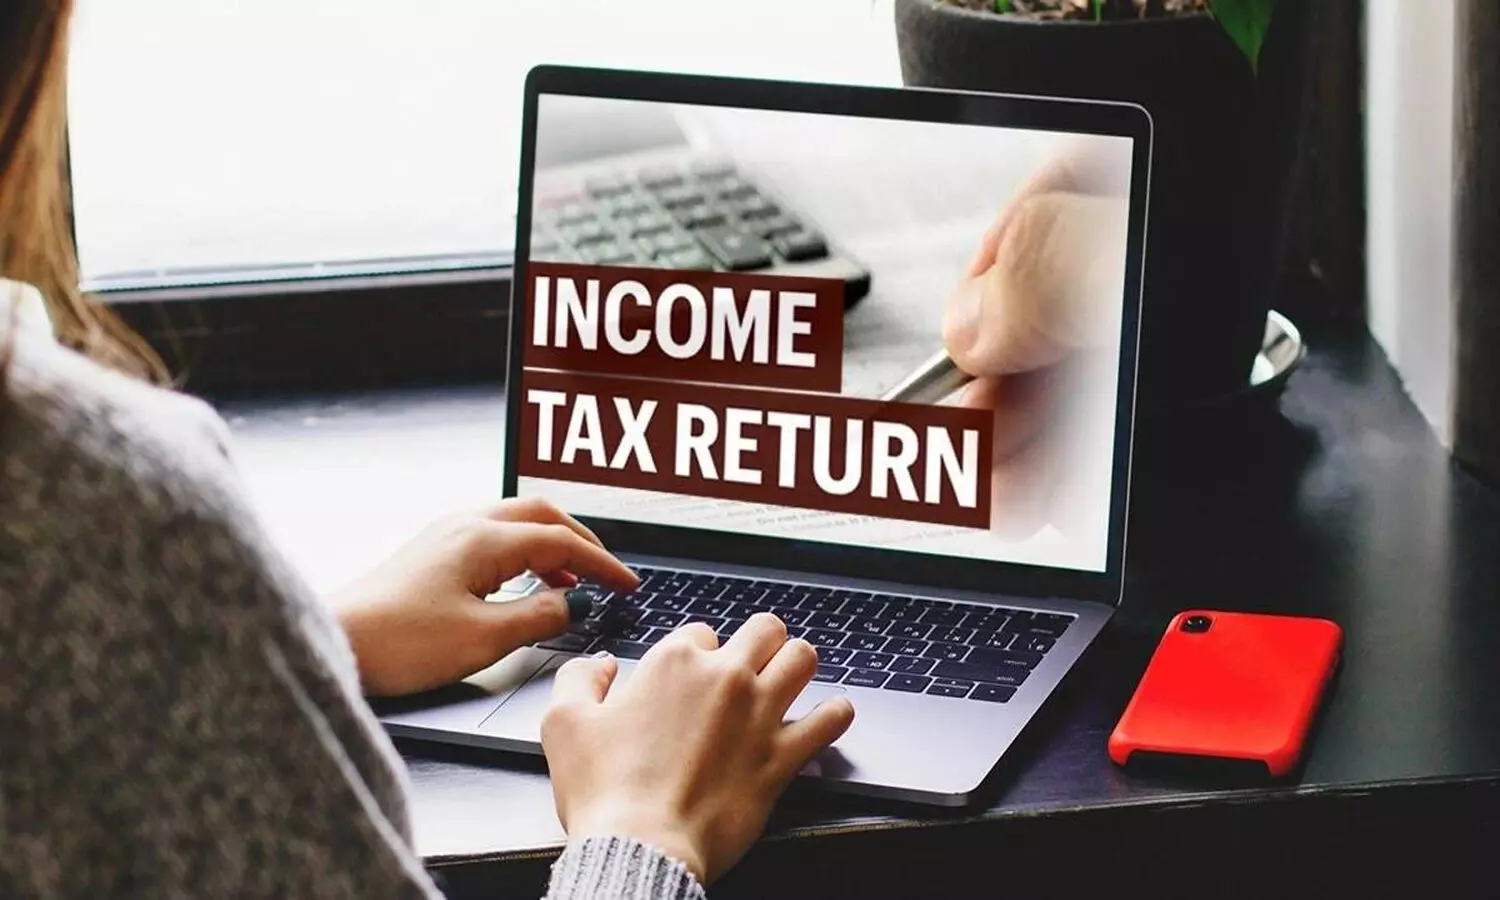 ITR Filing for financial year 2021-22: 10 important documents required to file income tax return